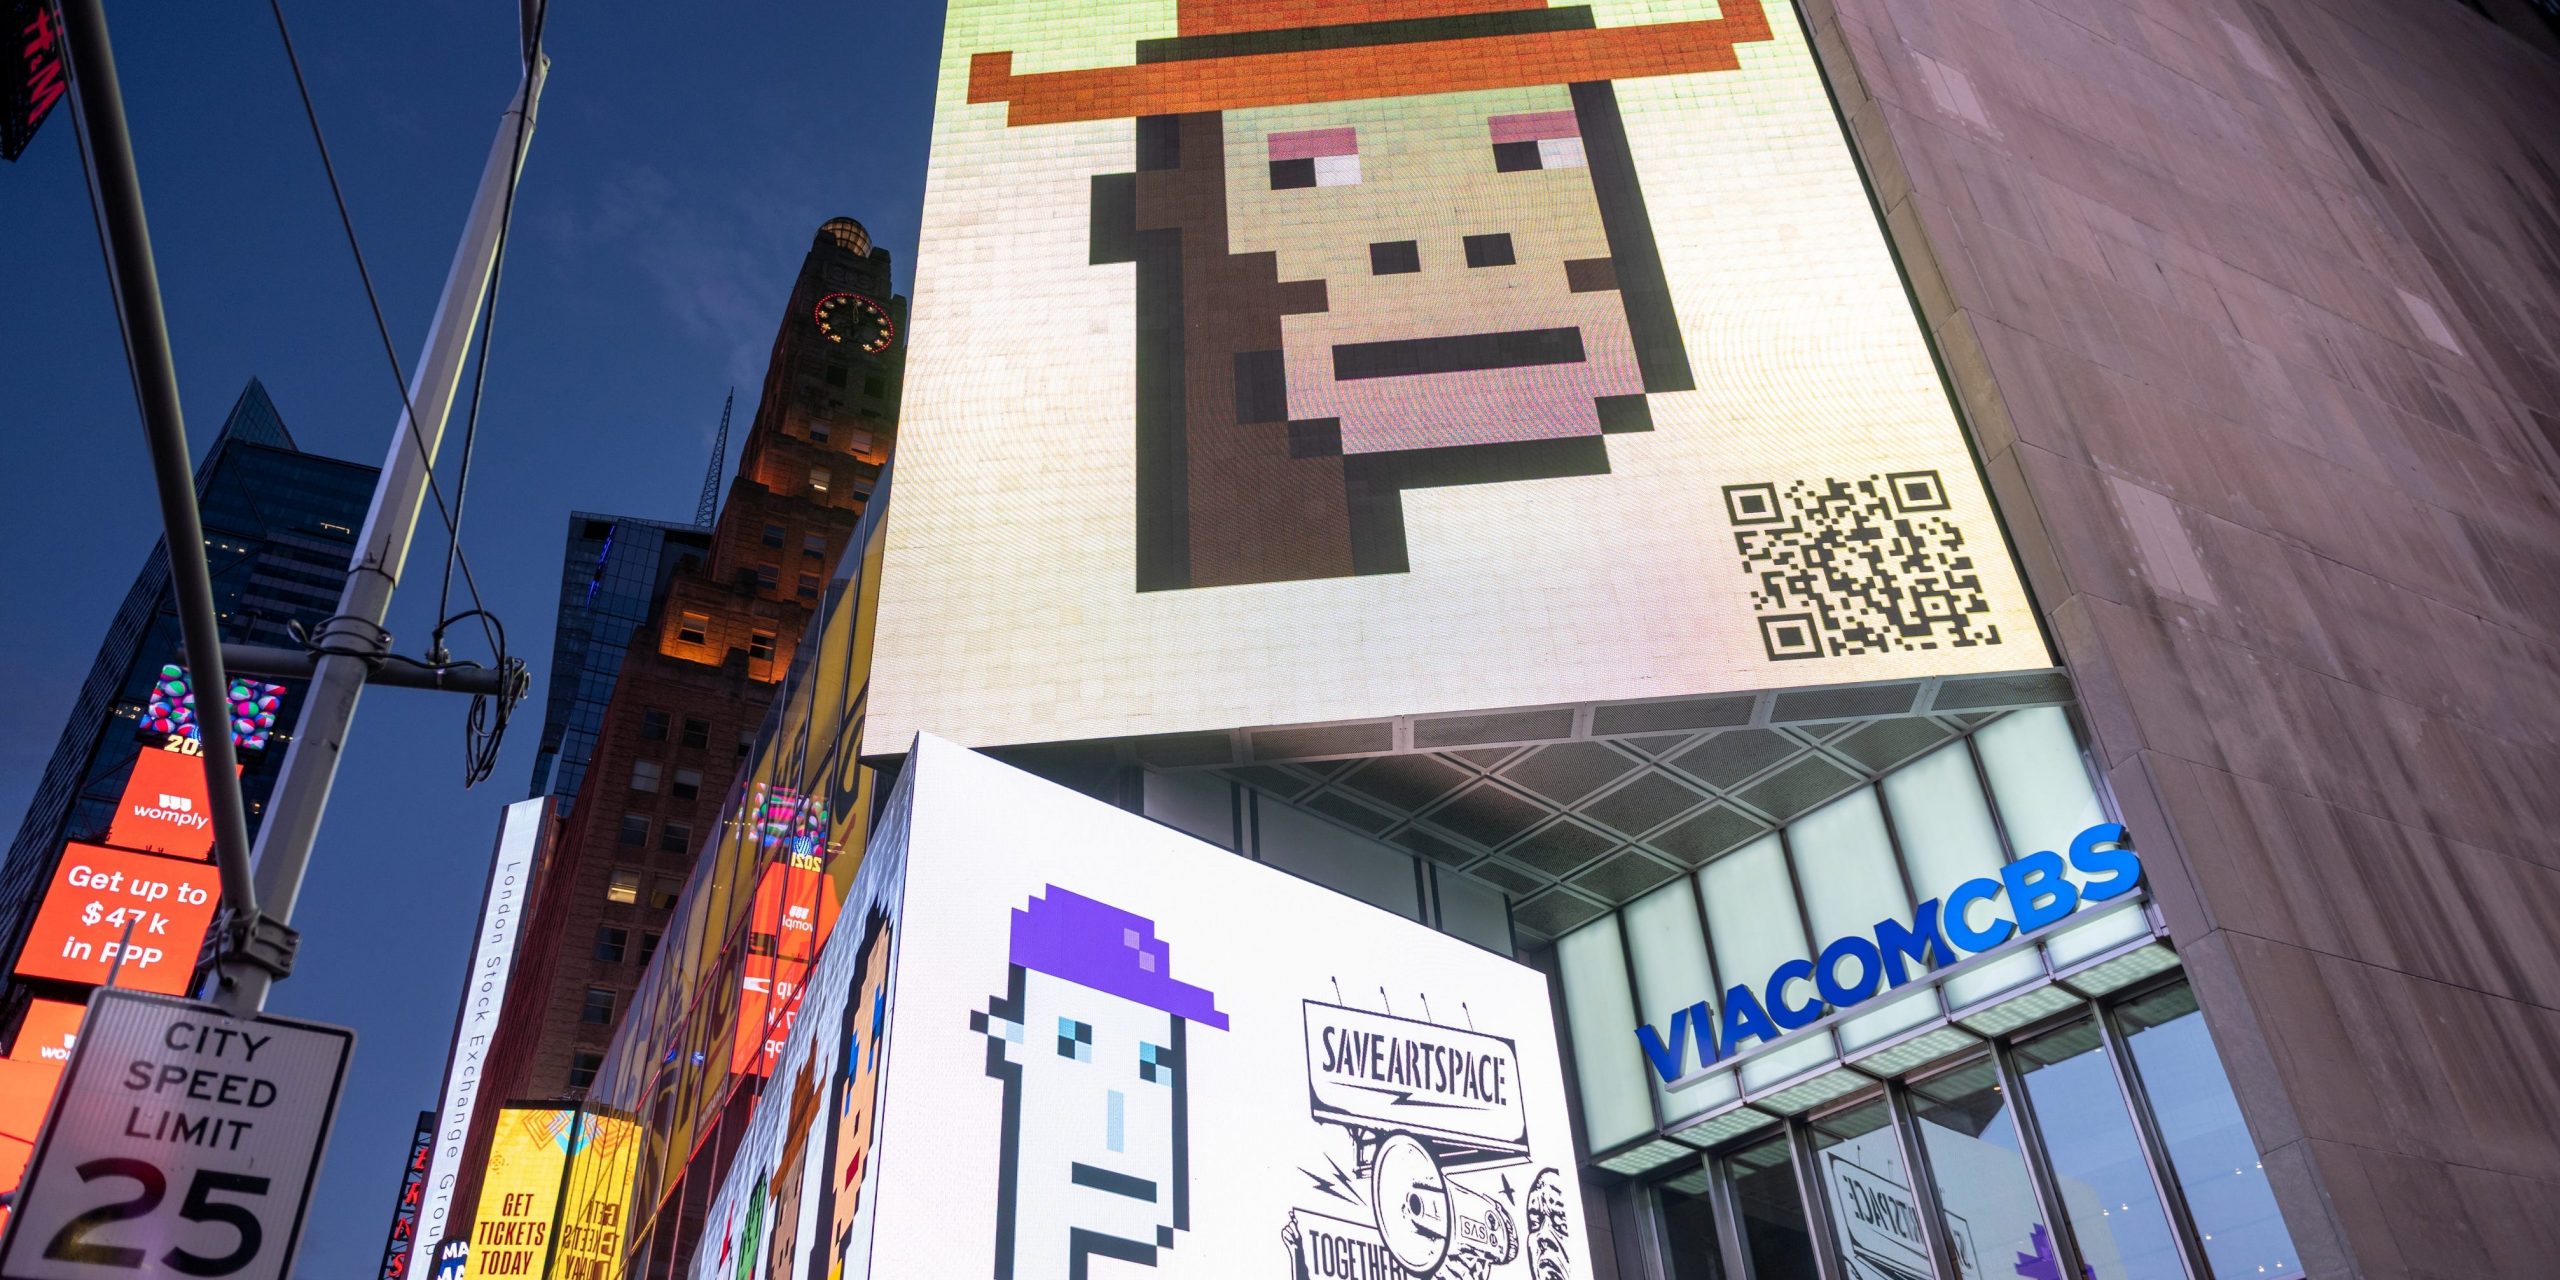 CryptoPunk digital art non-fungible token (NFT) displayed on a digital billboard in Times Square on May 12, 2021 in New York City.